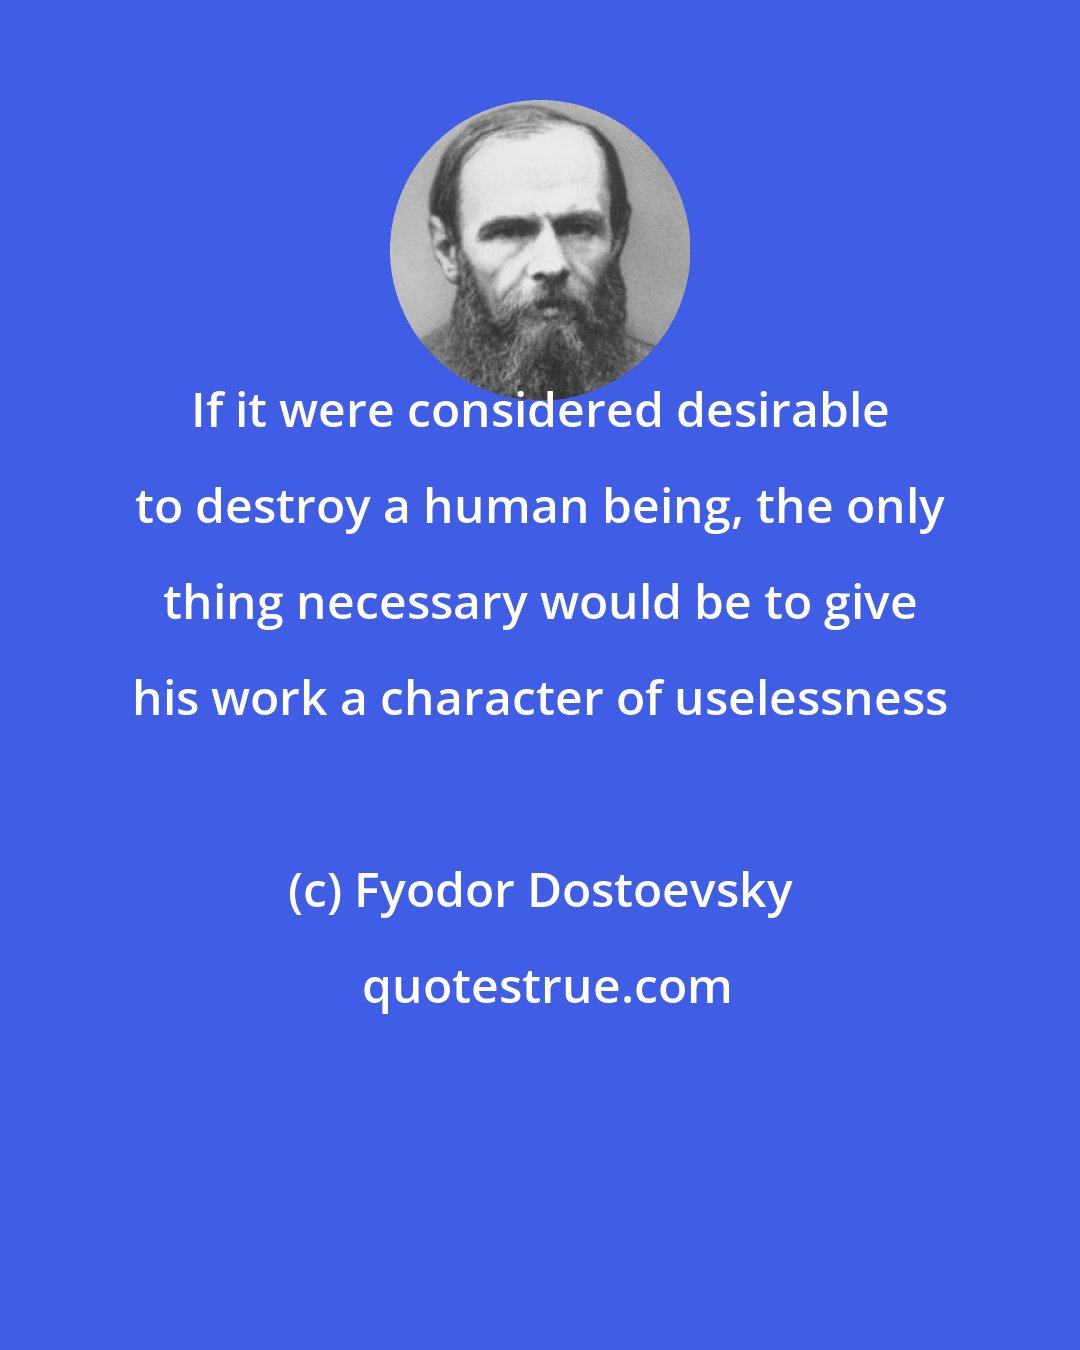 Fyodor Dostoevsky: If it were considered desirable to destroy a human being, the only thing necessary would be to give his work a character of uselessness